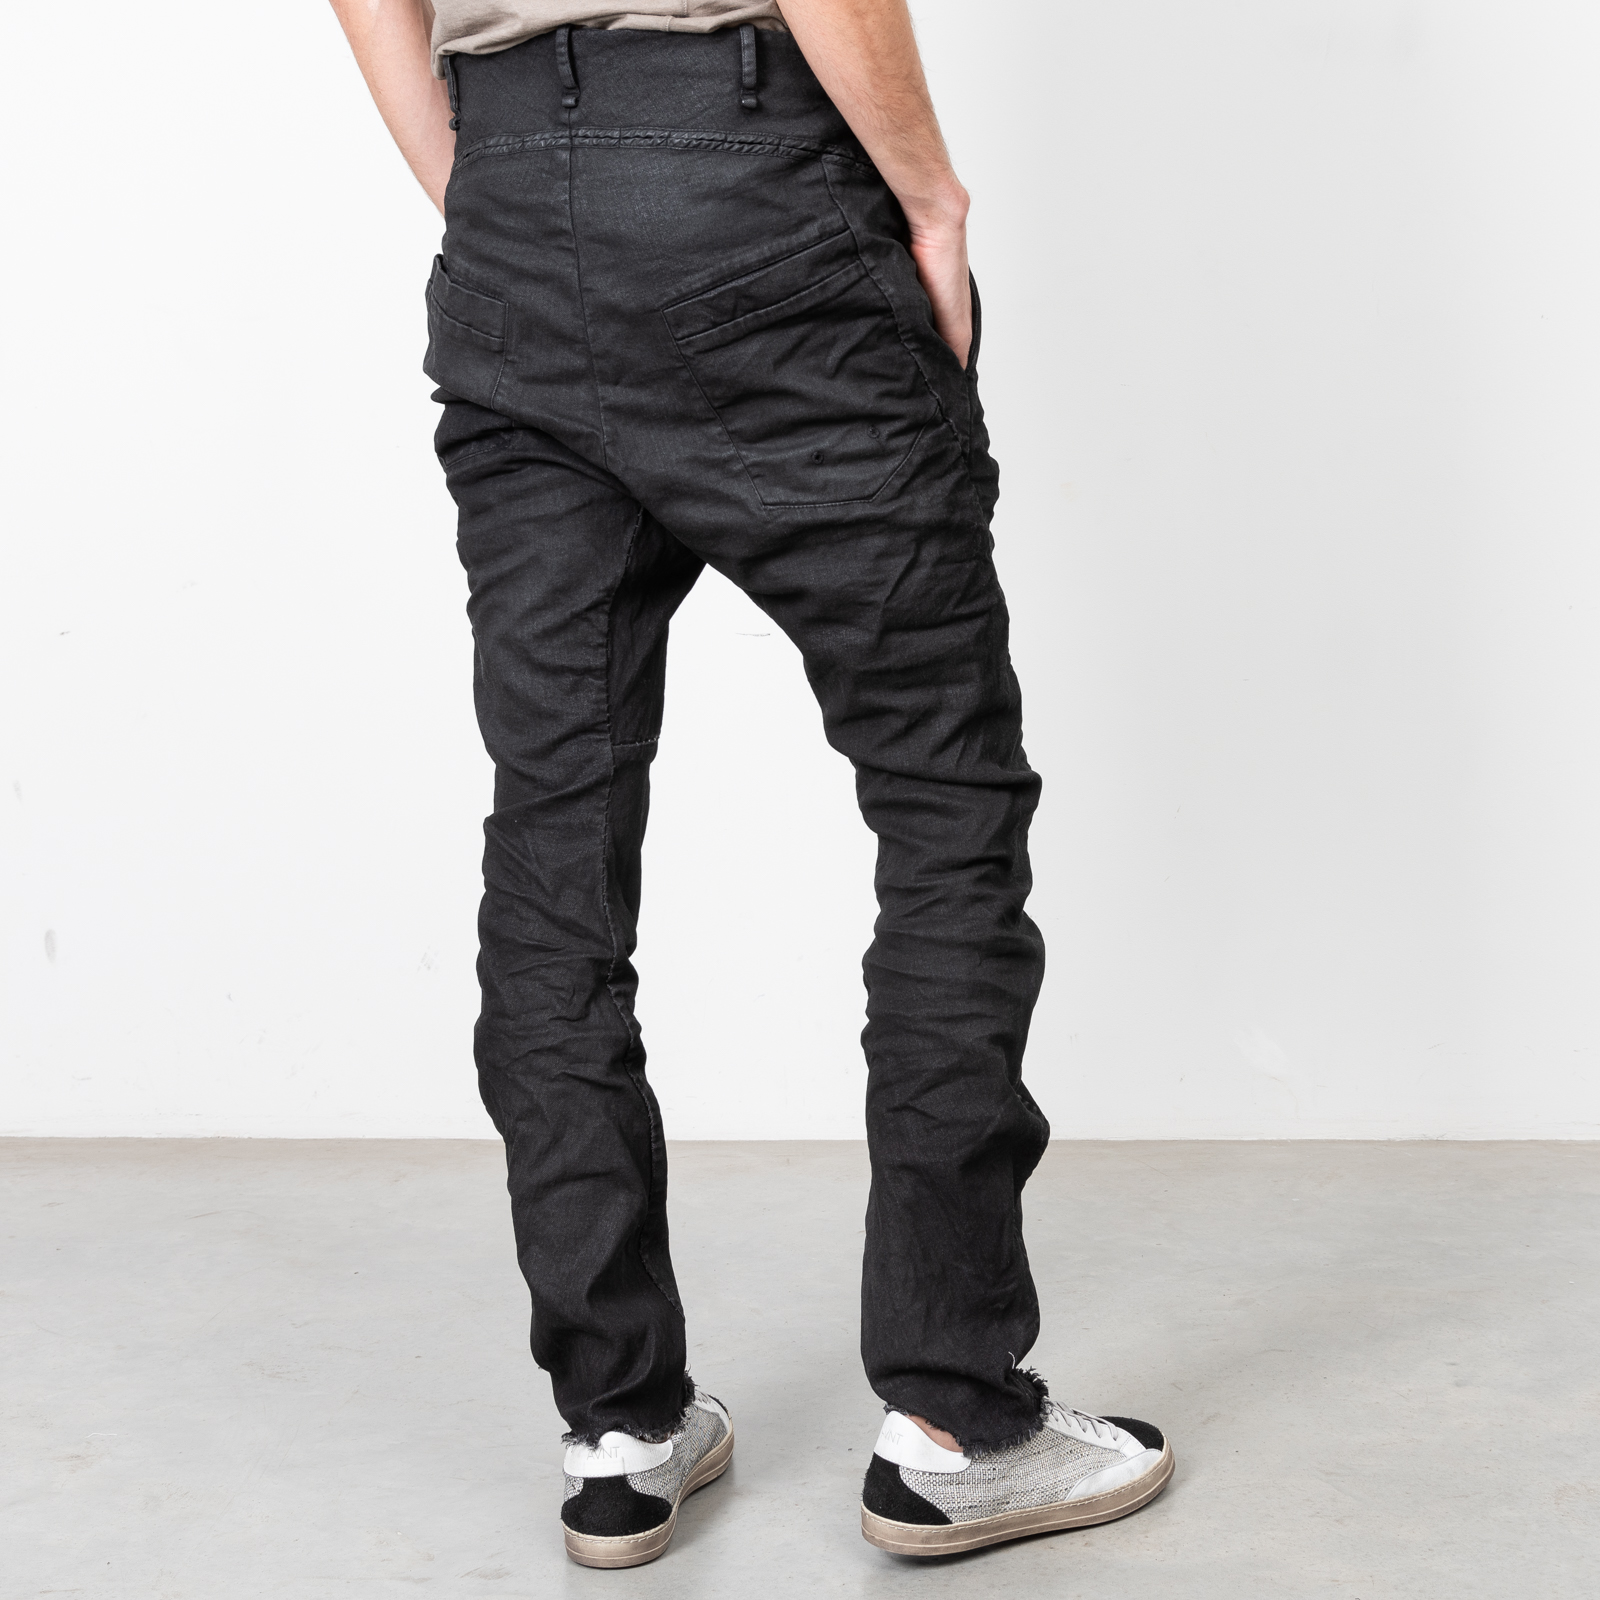 BLACK WAXED BAGGY PANTS|wolfensson